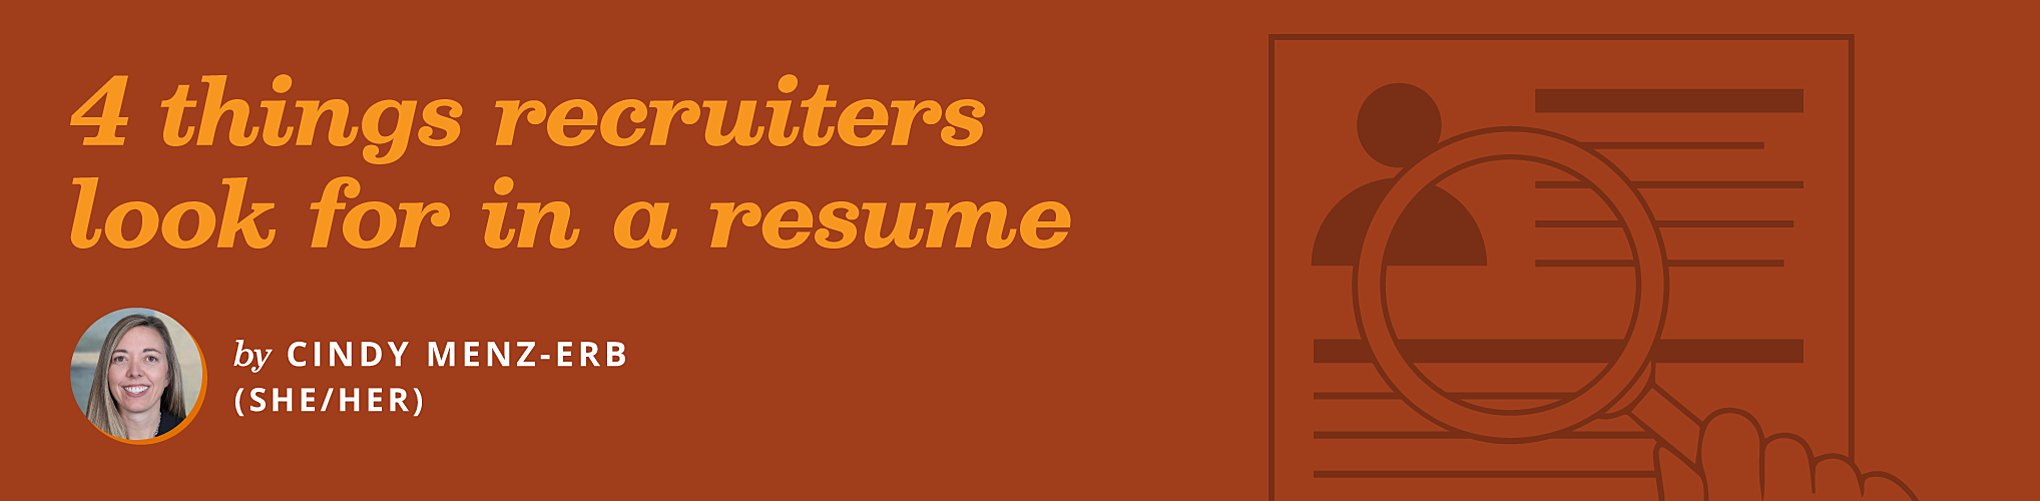 Light orange text on a dark orange background reads "4 things recruiters look for in a resume"